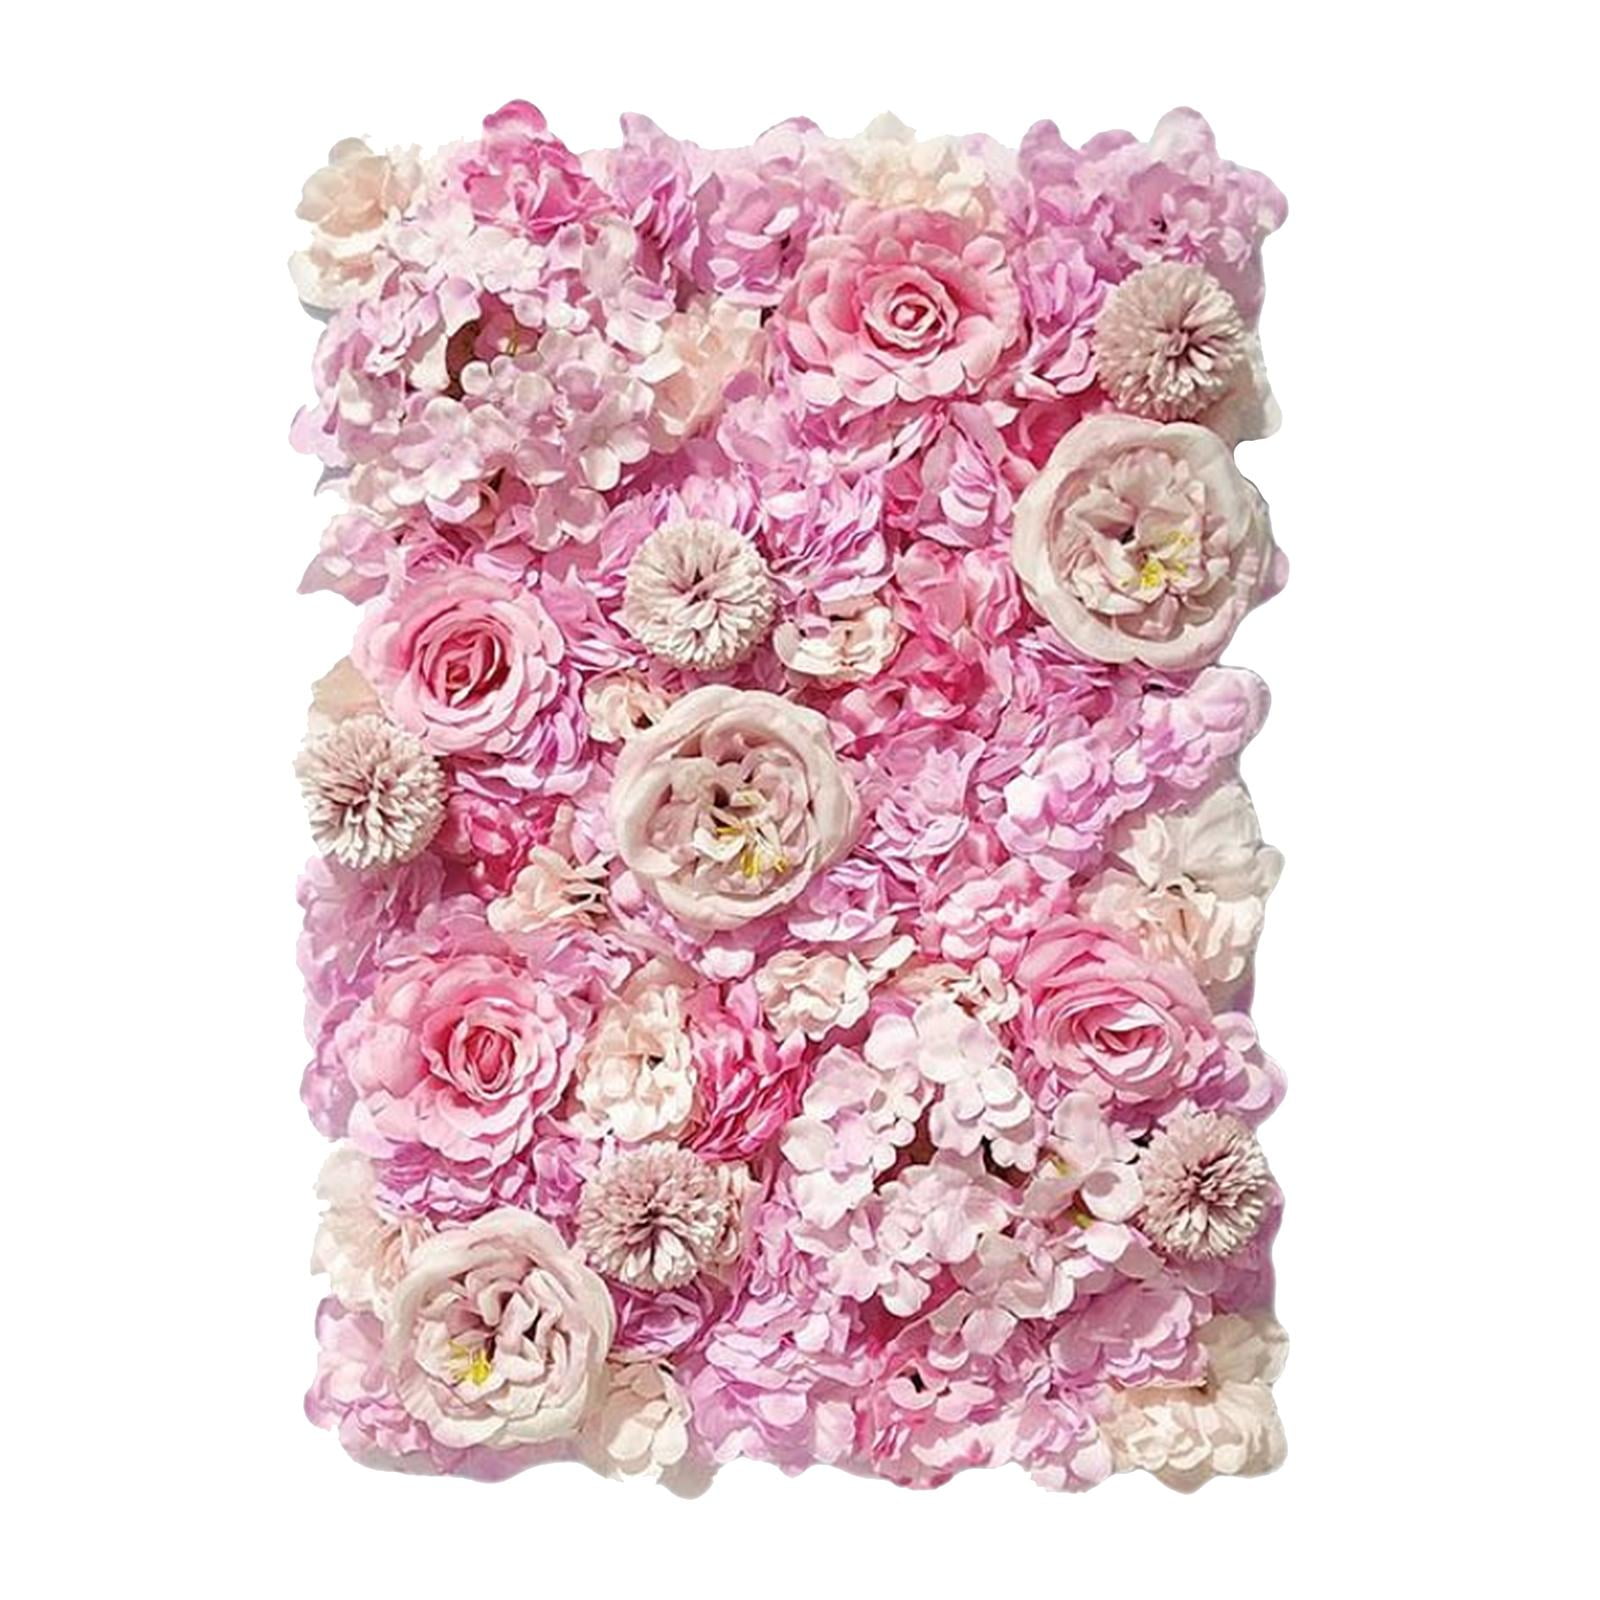 Pink & Cream BUBBAPAINT Party Decor Wendding Bridal Shower,Birthday 3D Paper Flower Decorations for Wall |Backdrop for Décor Giant Size Pre-Assembled Flower Girld Nursery Wall Decor Rooms 